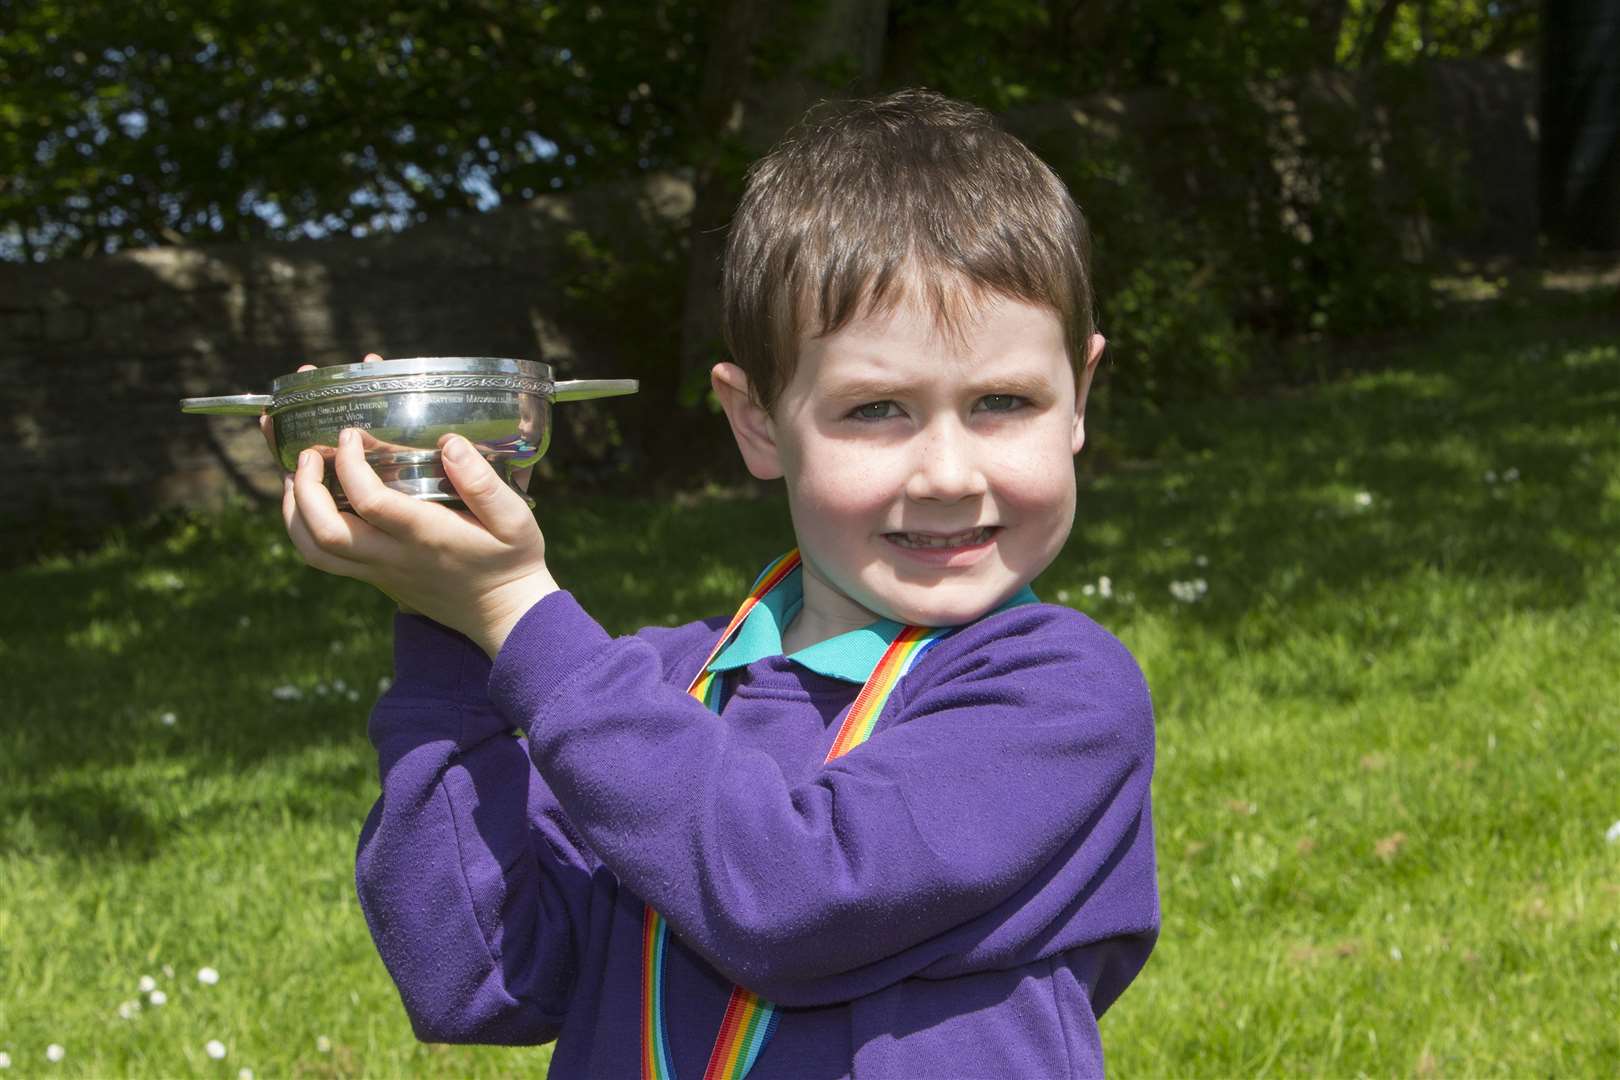 Toby Ronaldson won the Tomlinson Quaich for boys' P1 verse speaking. Picture: Robert MacDonald / Northern Studios